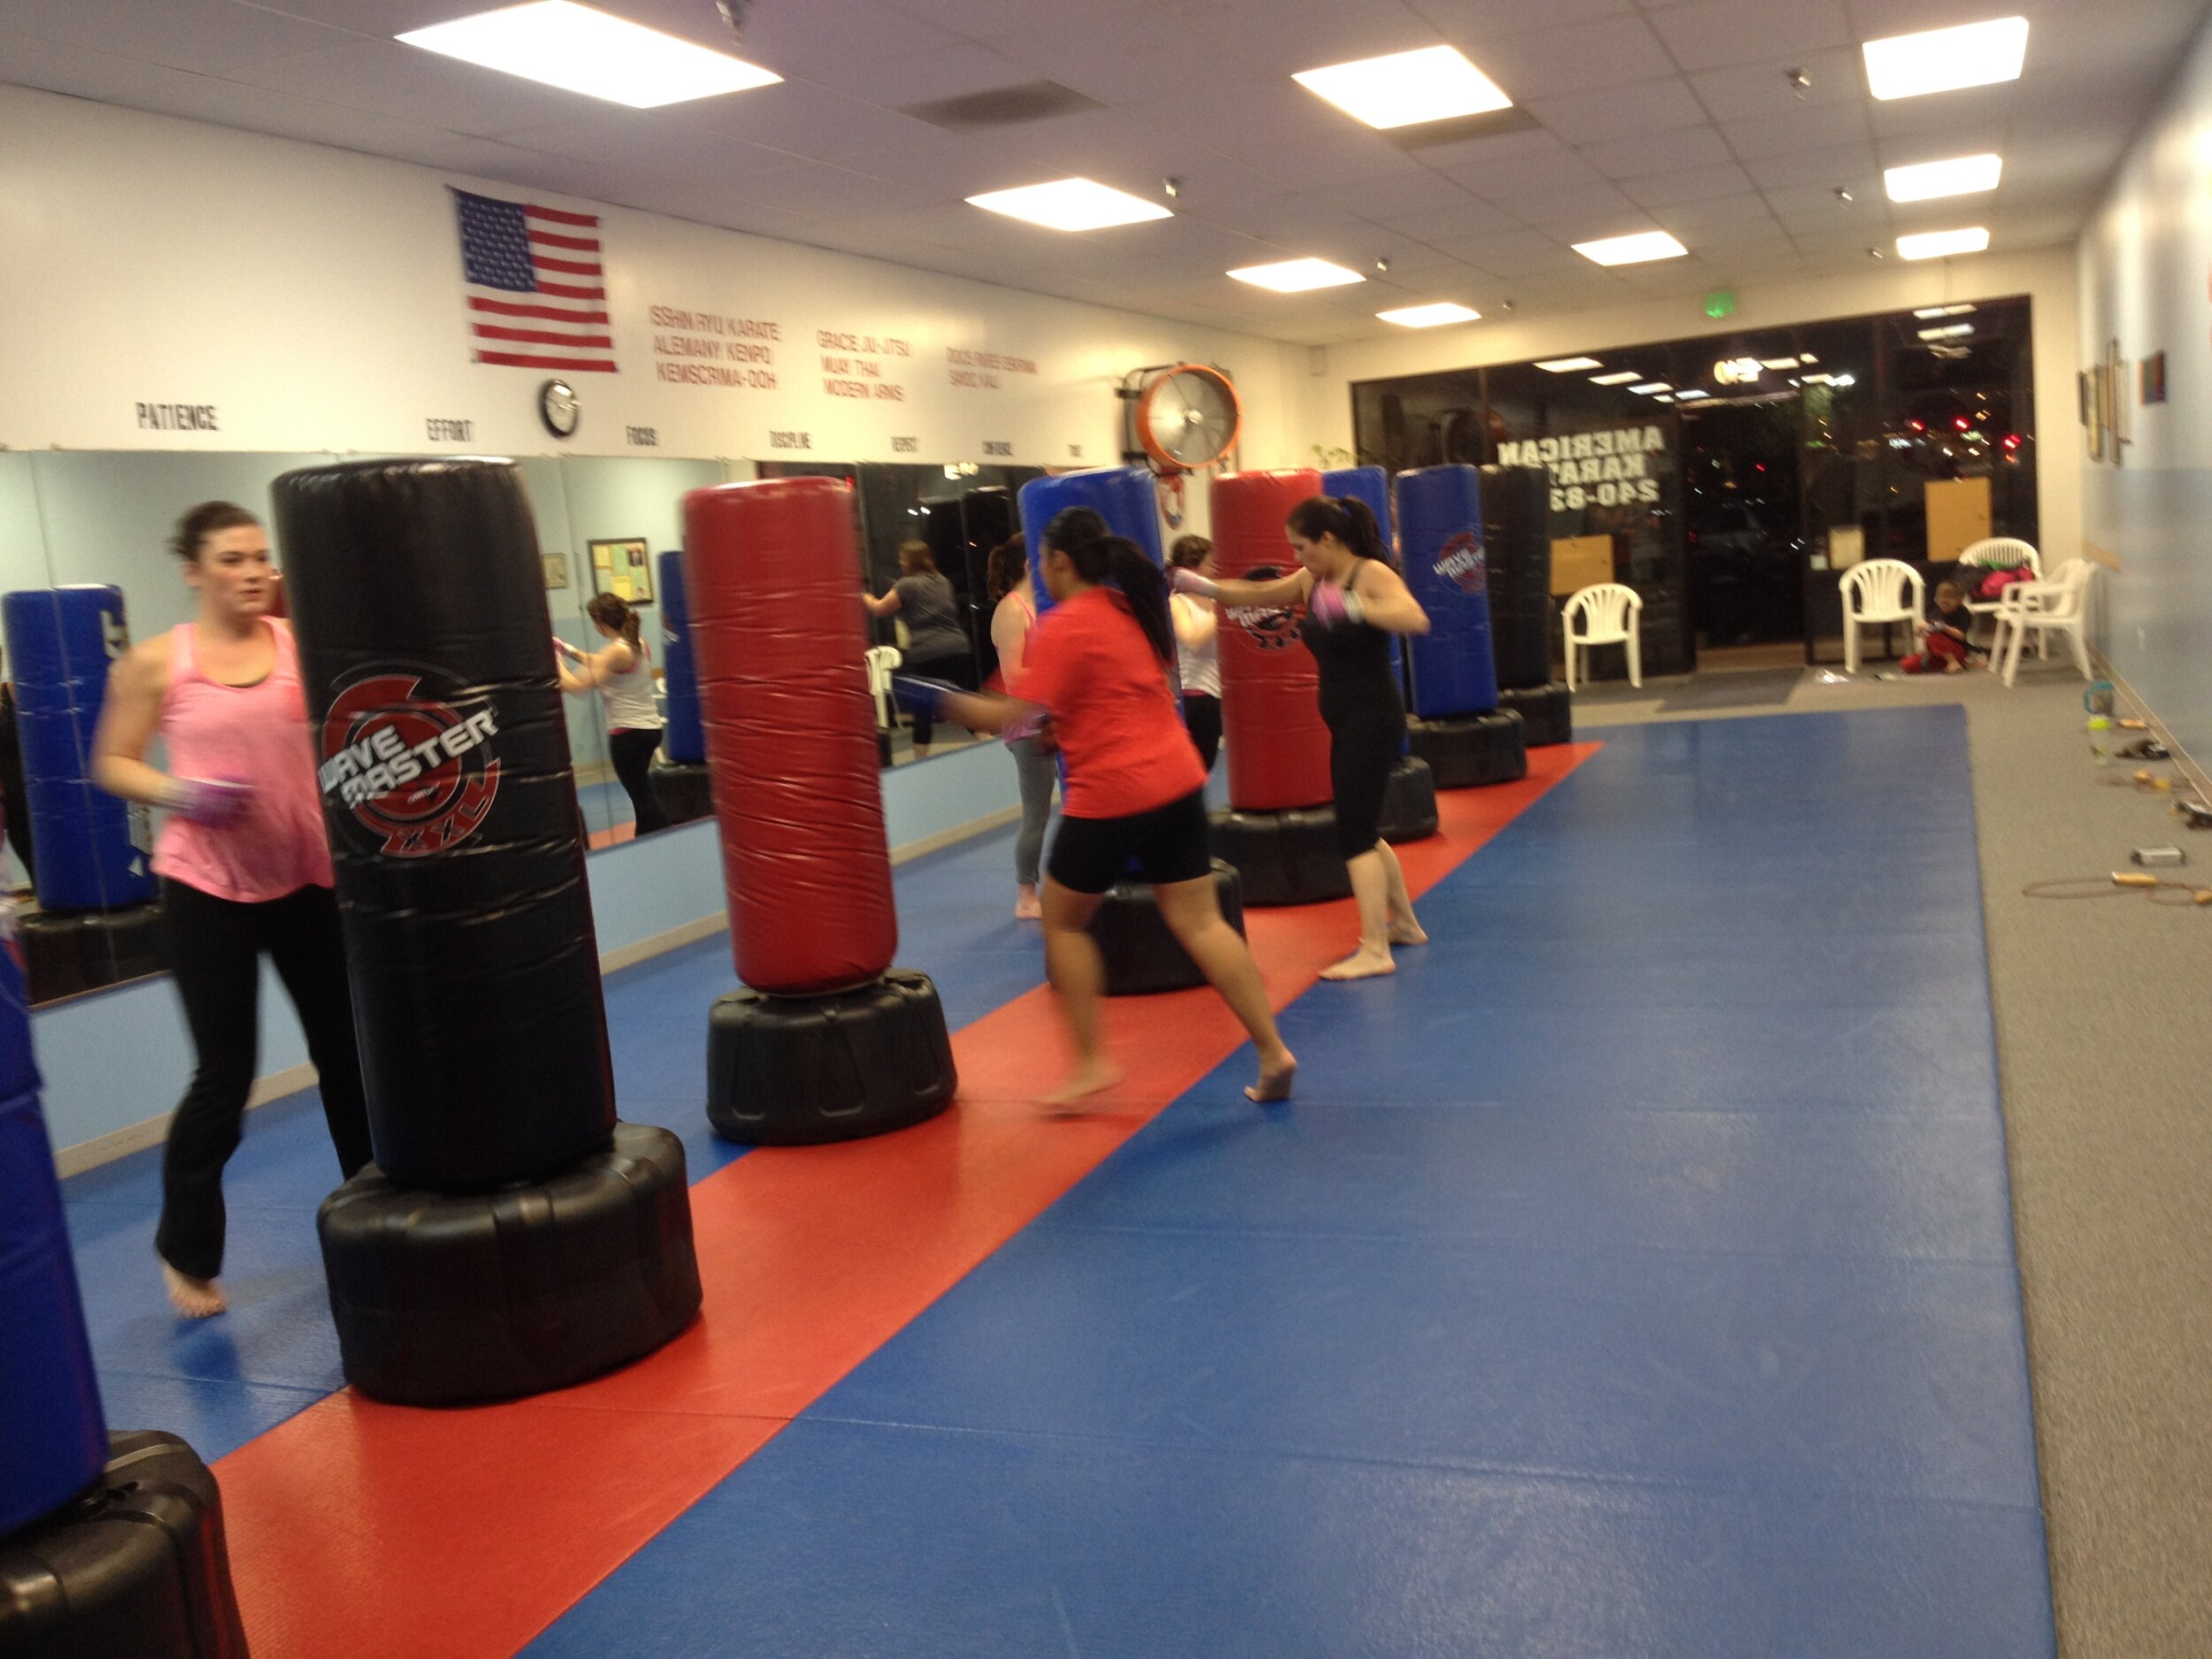   Kickboxing Classes    Build Strength and Burn Calories in a Fun Environment    Learn More  